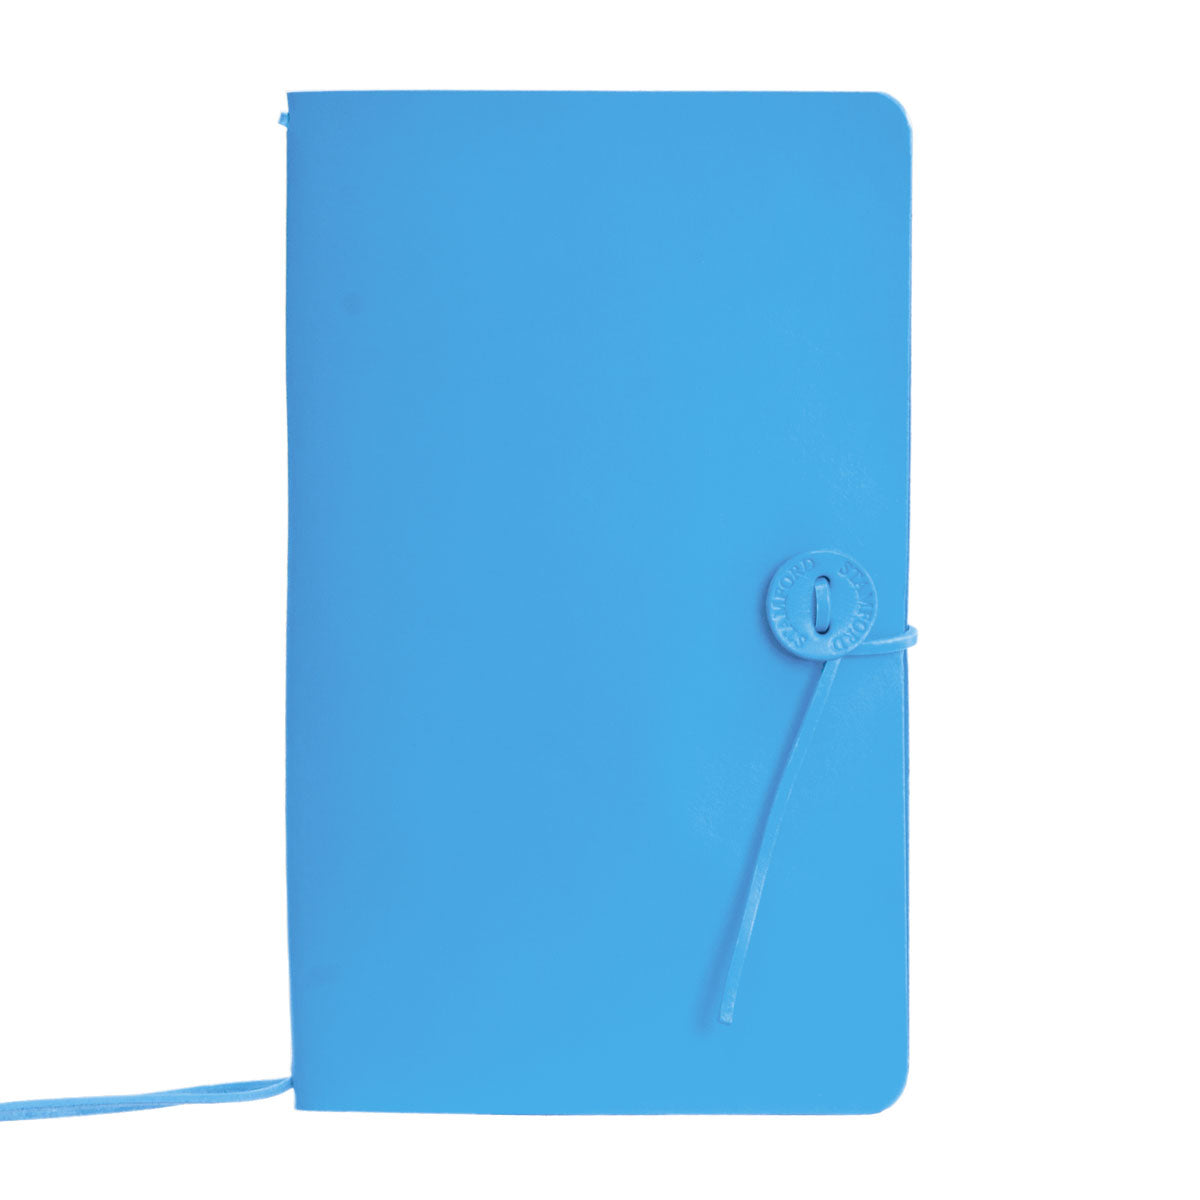 Blue leather refillable travellers journal